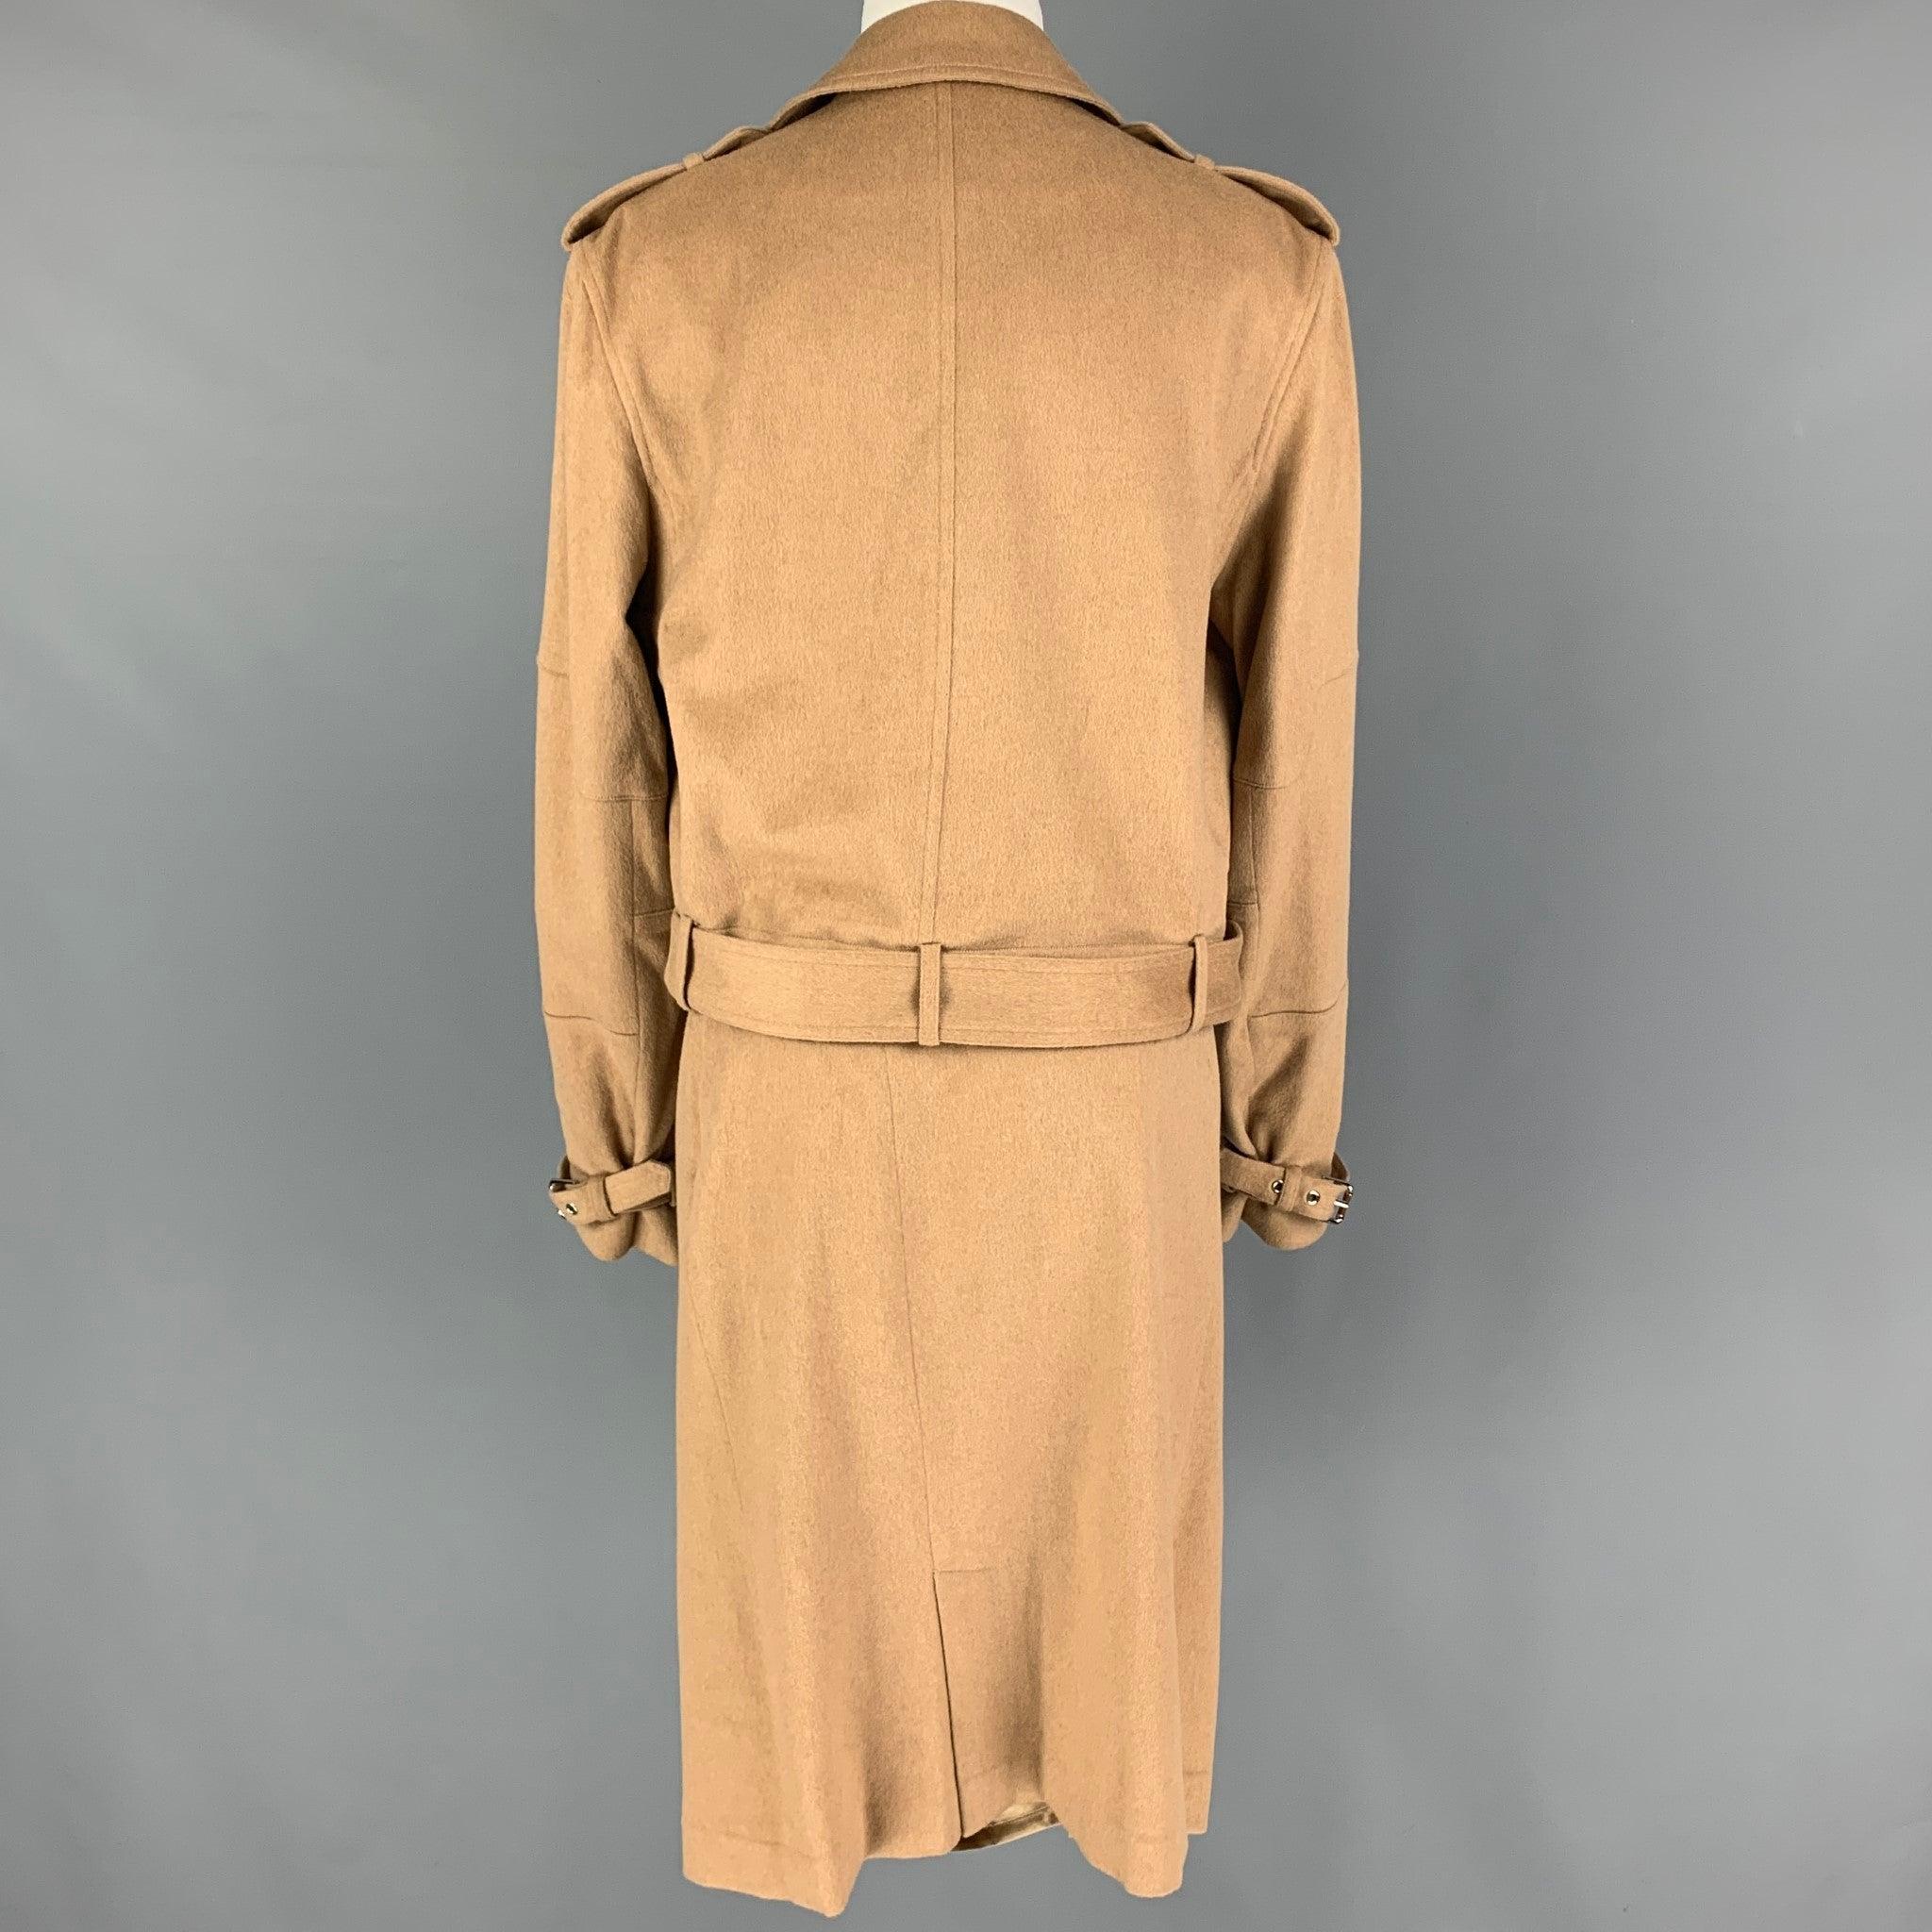 RALPH LAUREN 'Black Label' skirt suit comes in a camel color baby camel hair material featuring a biker style jacket, silver tone hardware, epaulettes, belted with a zip up closure, and a matching pen skirt. Includes tags. Very Good
Pre-Owned